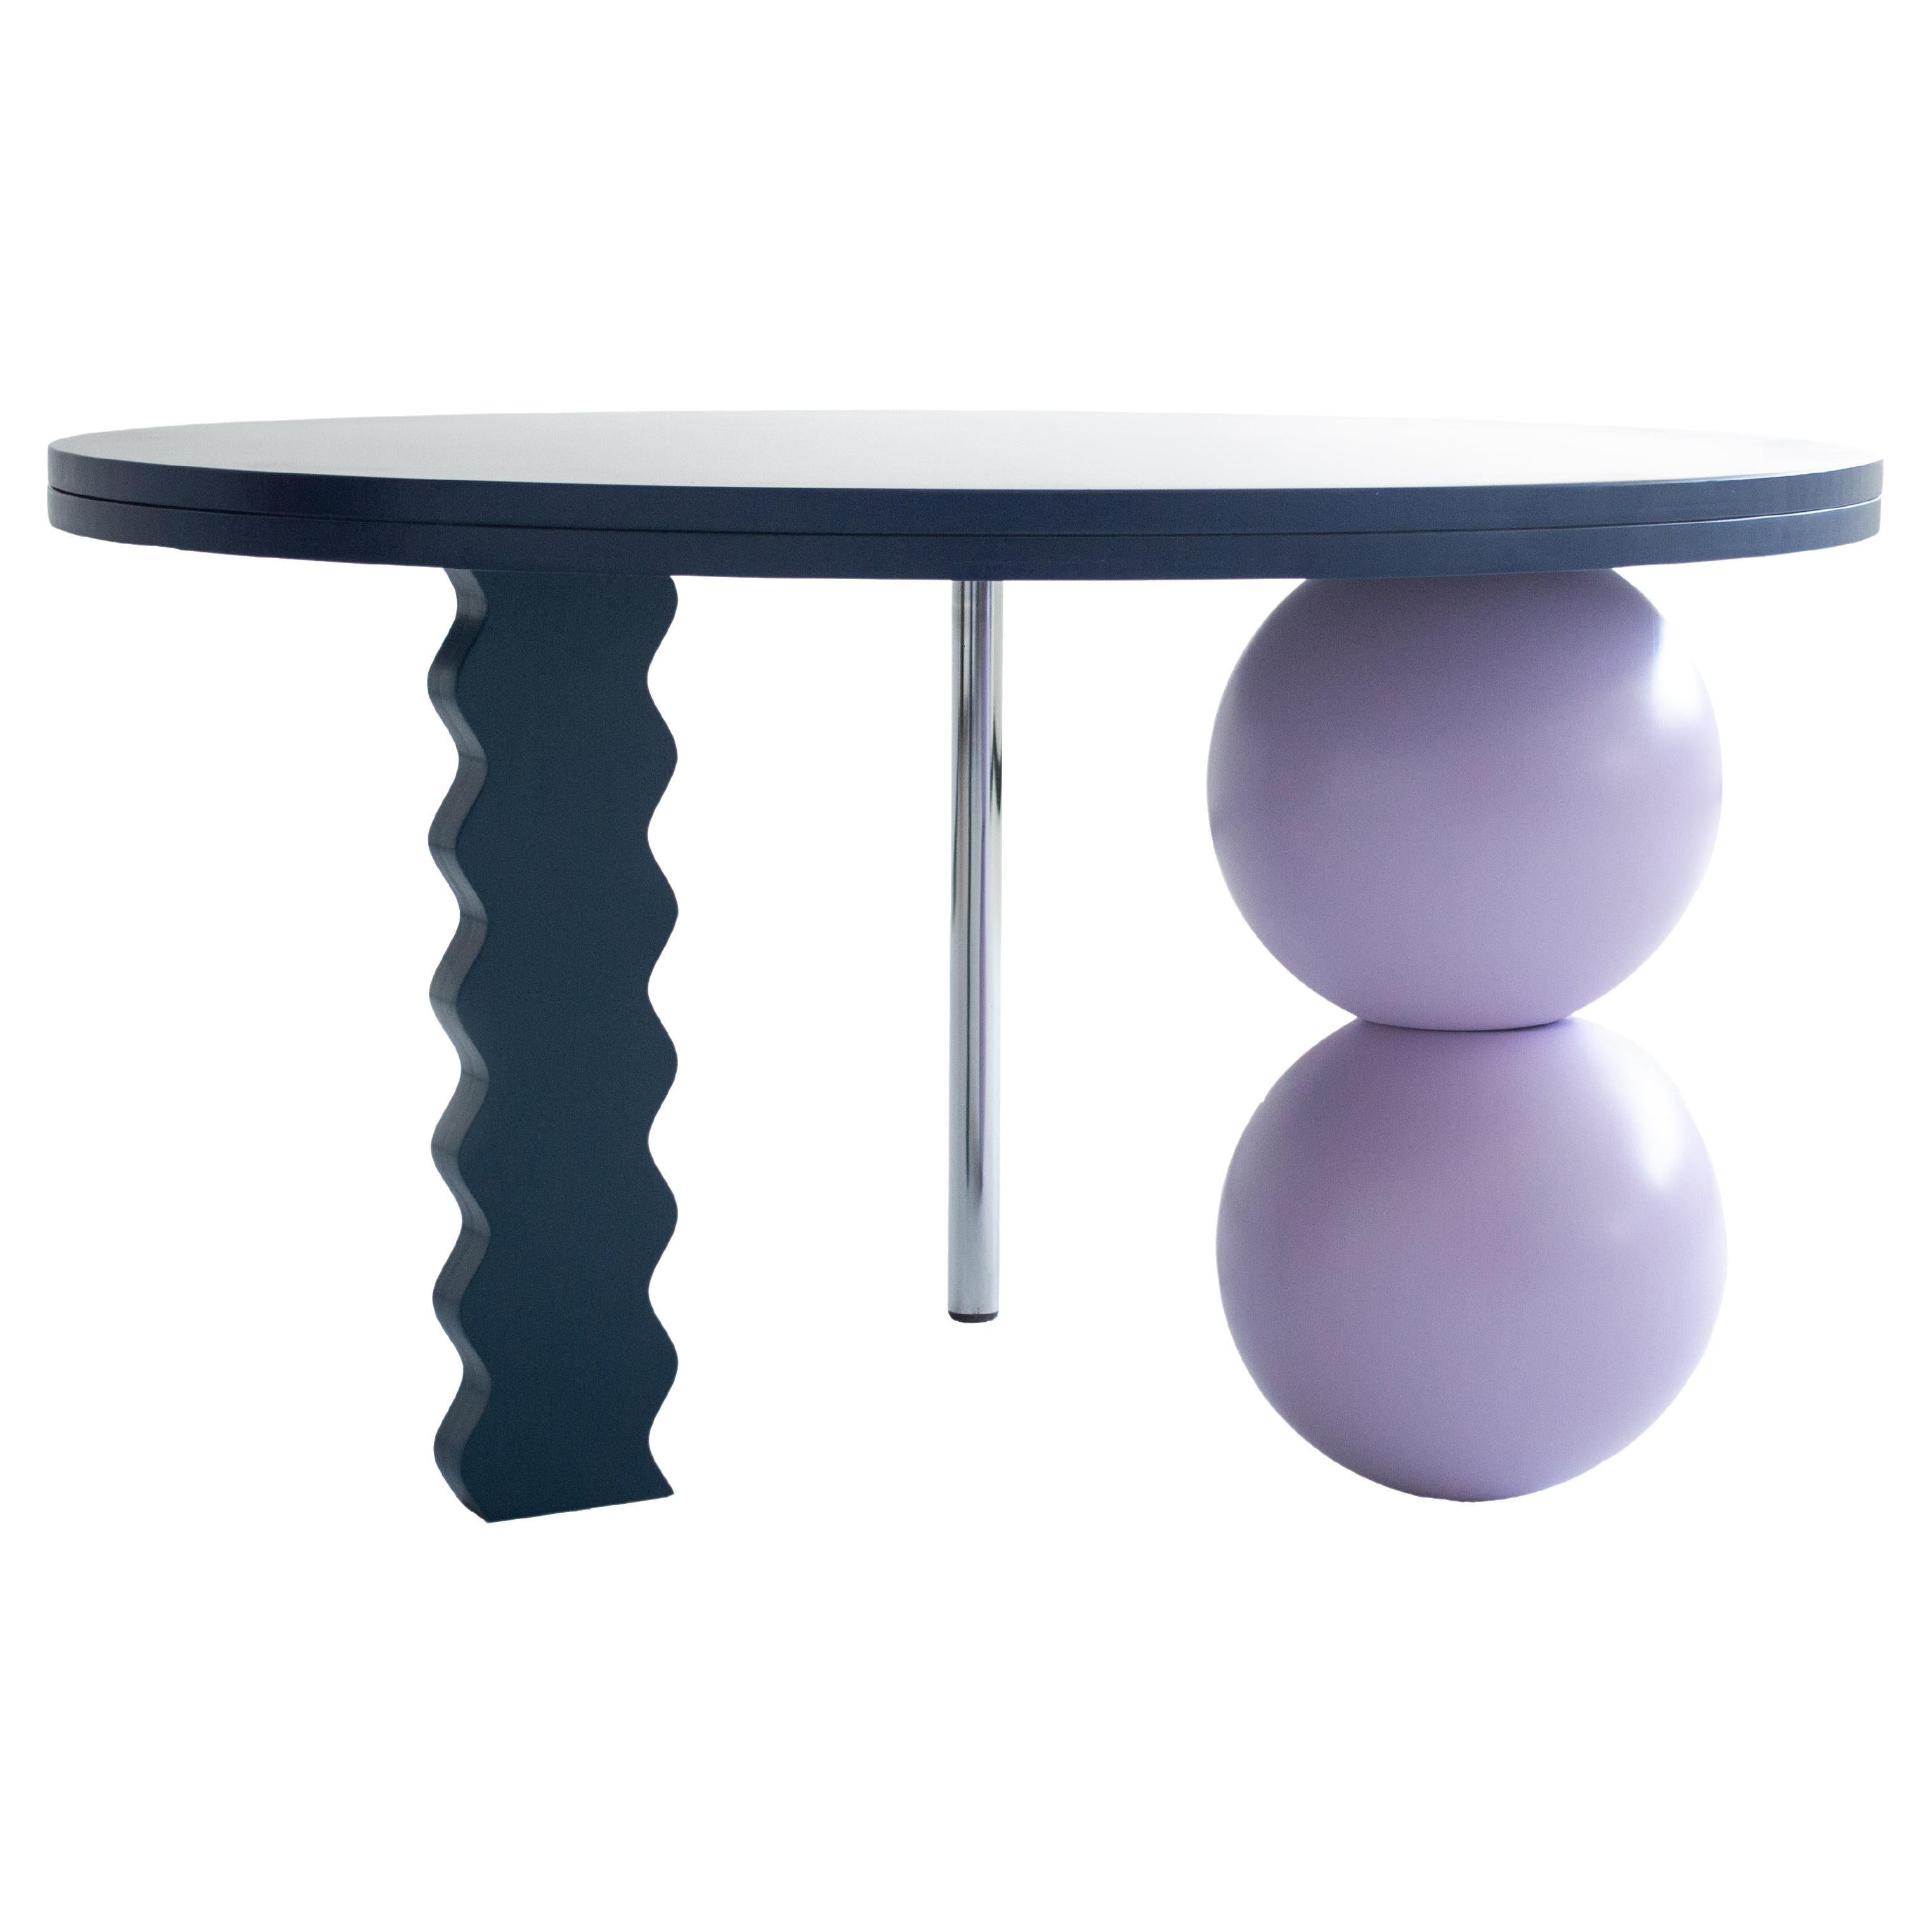 Multicolored (Blue, Petrol, Lilac) Coffee Table with Stainless Steel and Spheres